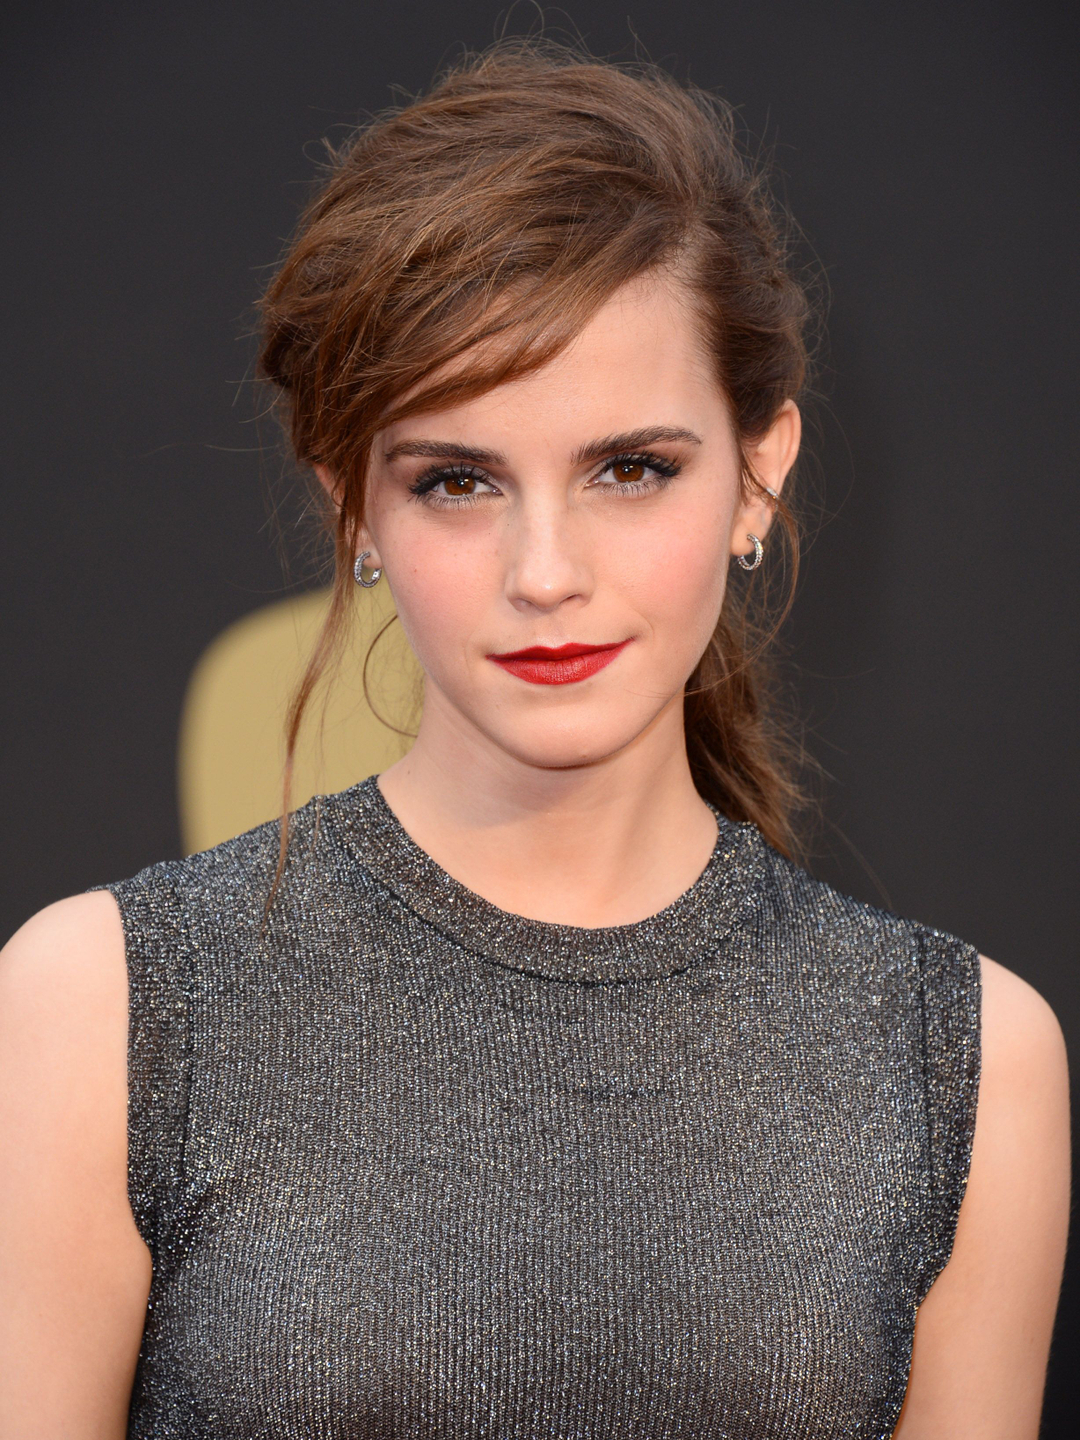 Emma Watson who is her father